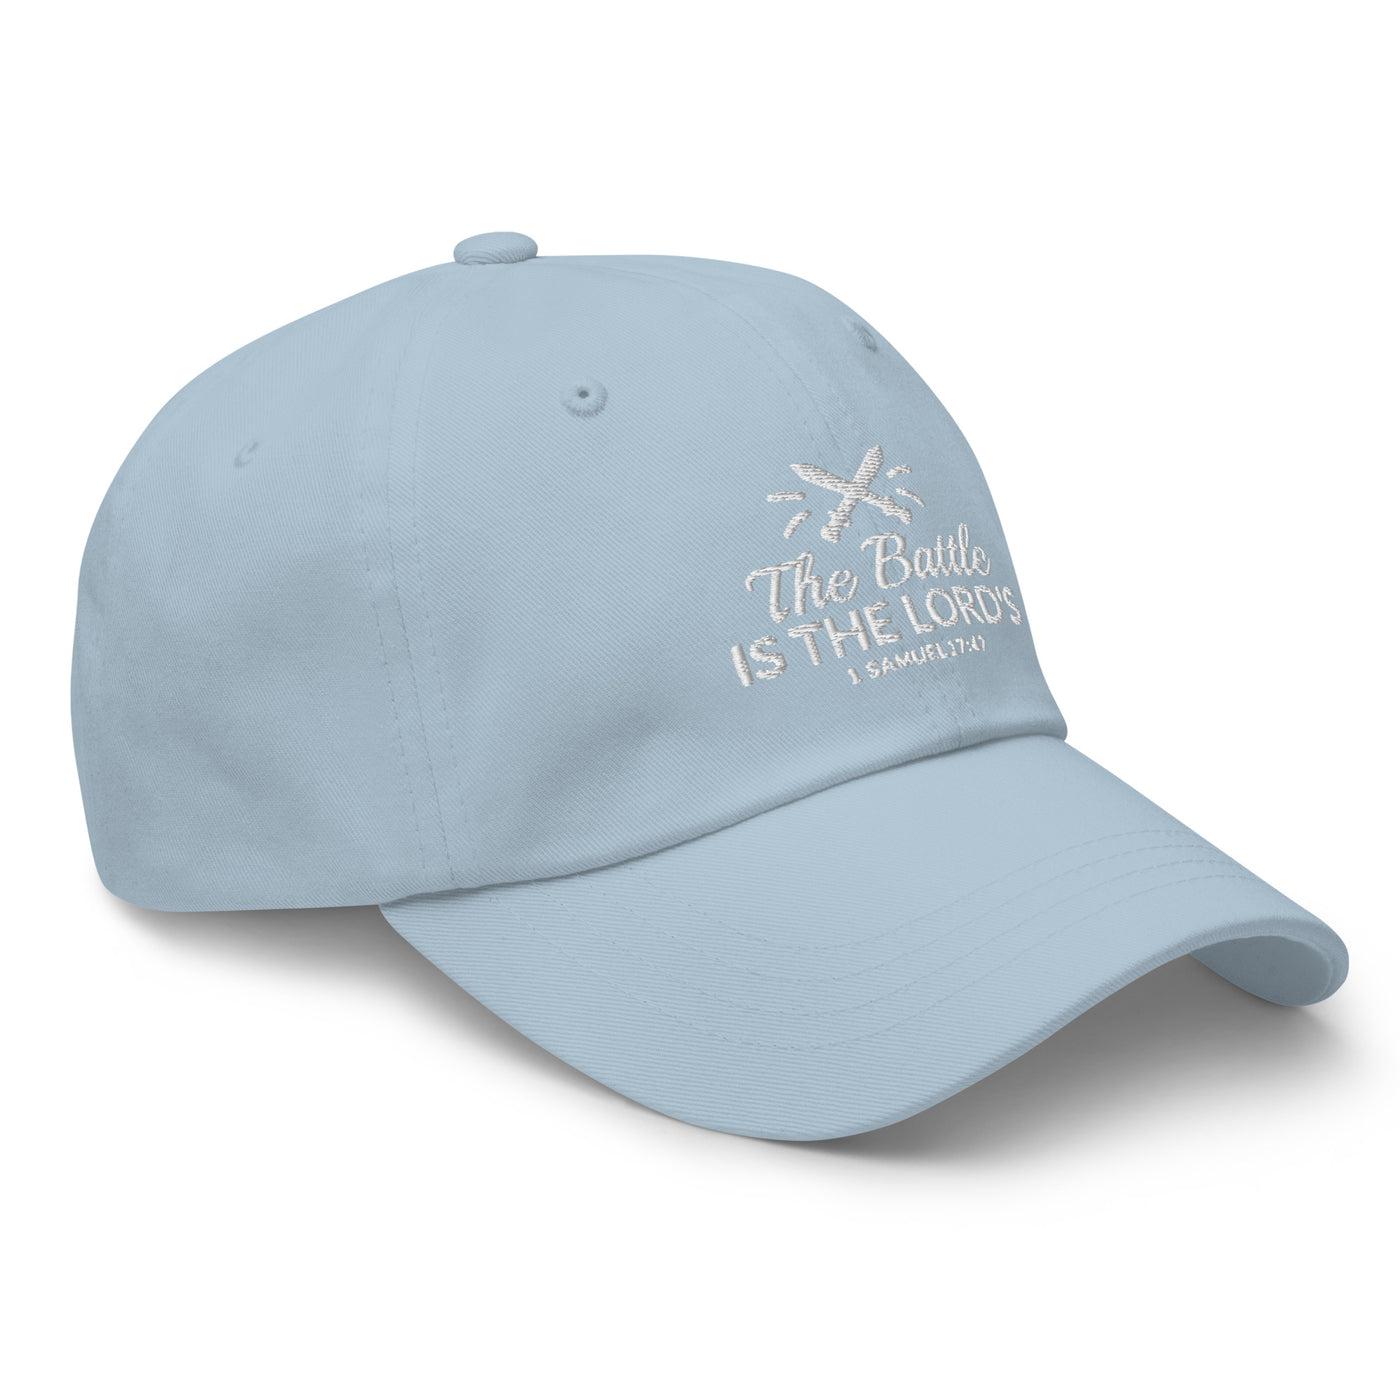 F&H Christian The Battle Is The Lord's Baseball Hat